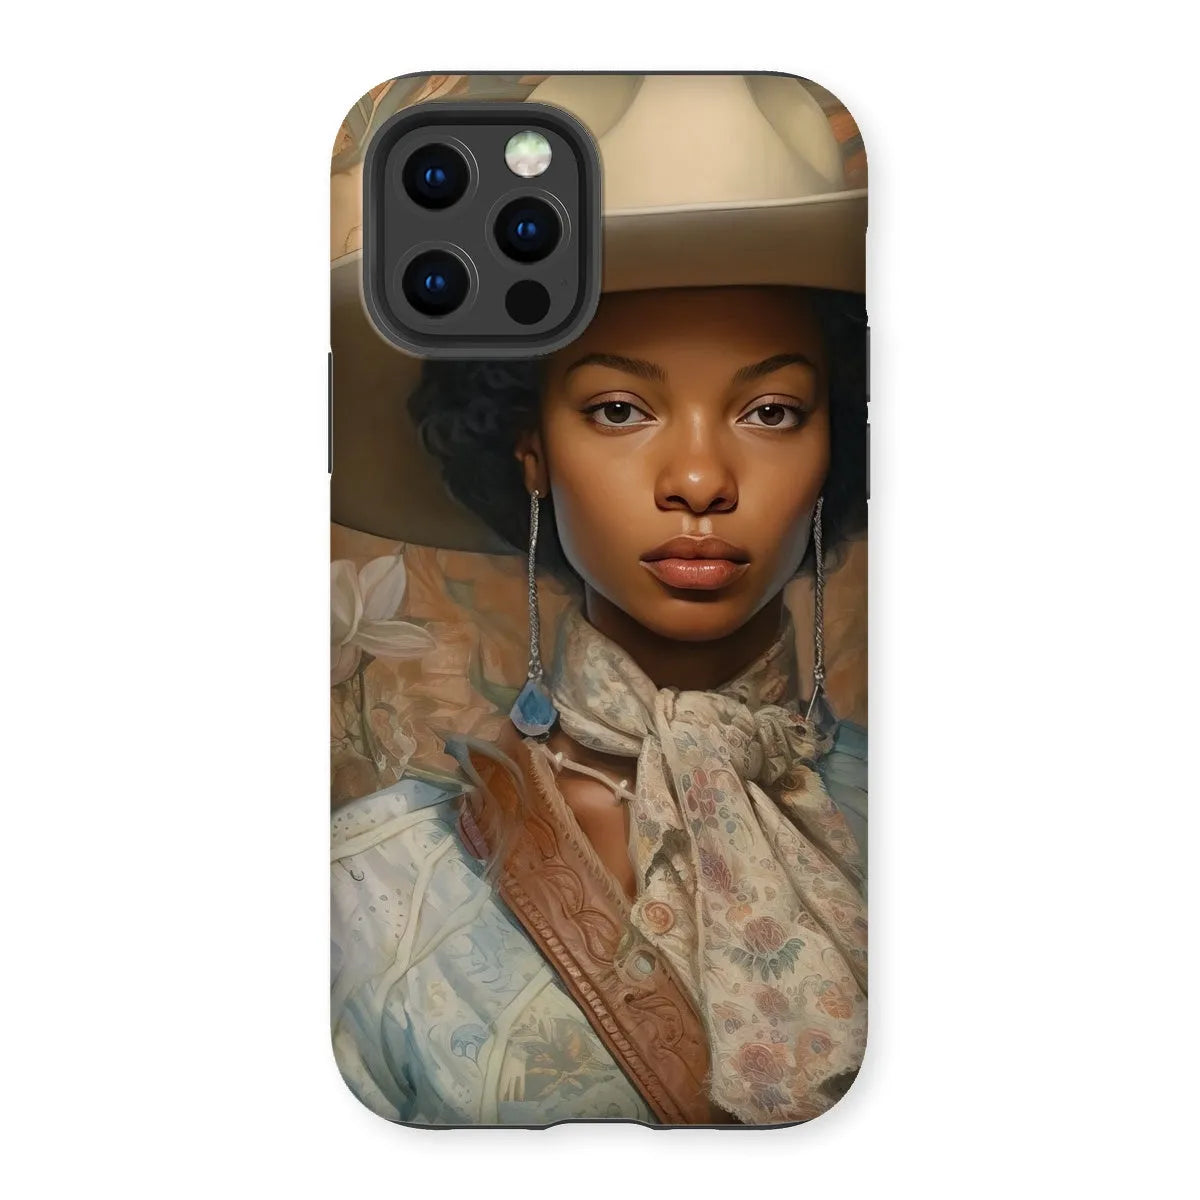 Imani The Lesbian Cowgirl - Sapphic Art Phone Case - Iphone 12 Pro / Matte - Mobile Phone Cases - Aesthetic Art